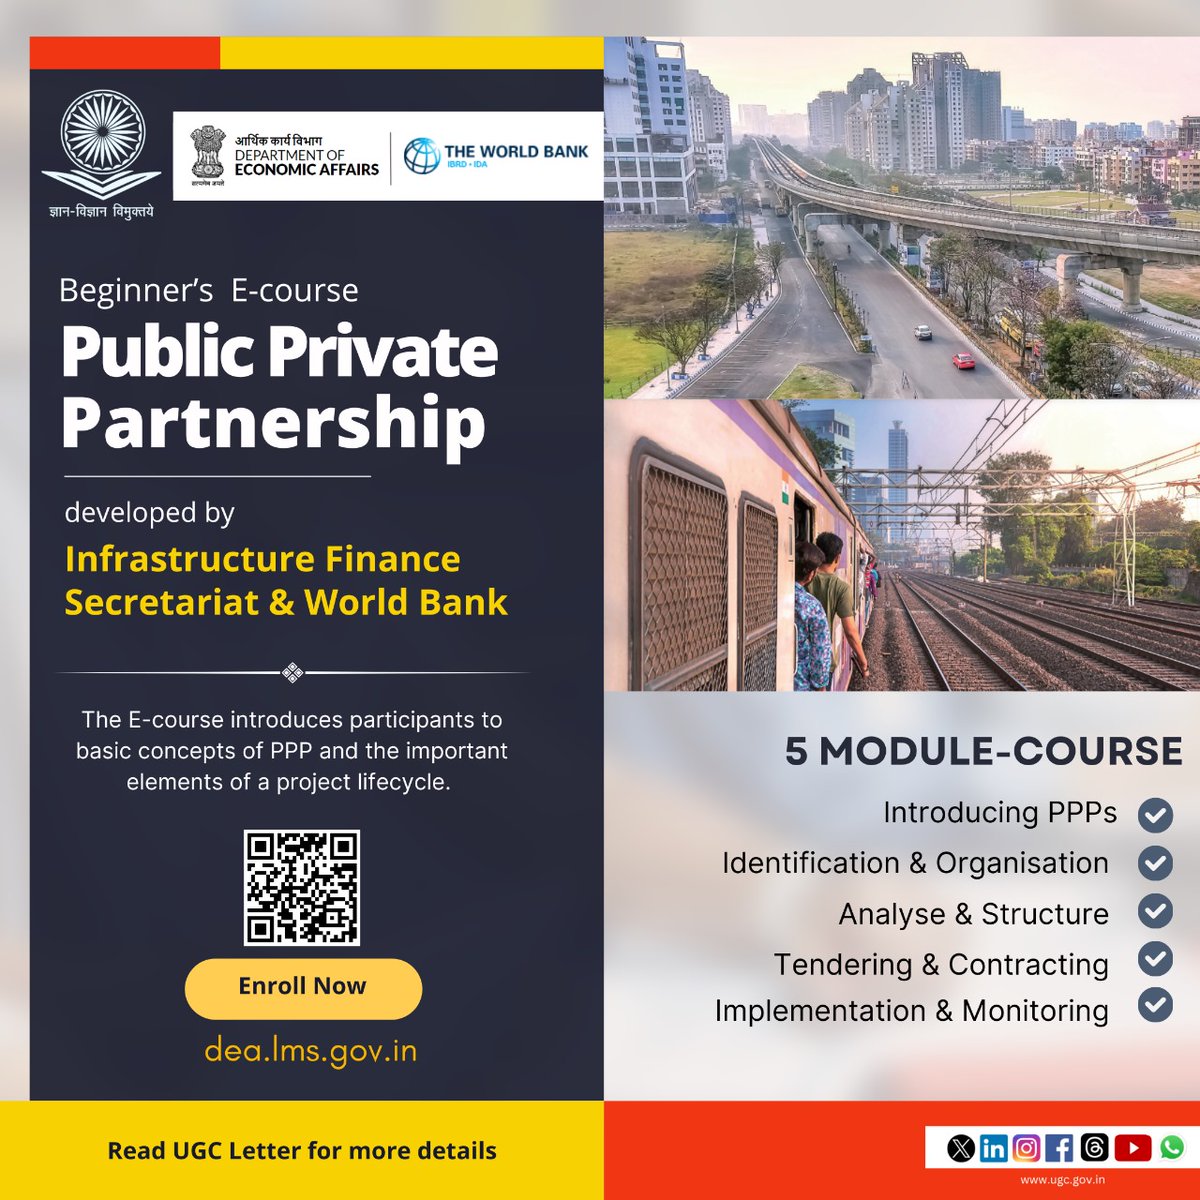 Considering a PPP contract? Learn from the Infrastructure Finance Secretariat and the World Bank. Discover how to identify, structure, contract, implement, and monitor Public-Private Partnerships (PPPs). Enroll in the e-course co-developed by the Infrastructure Finance